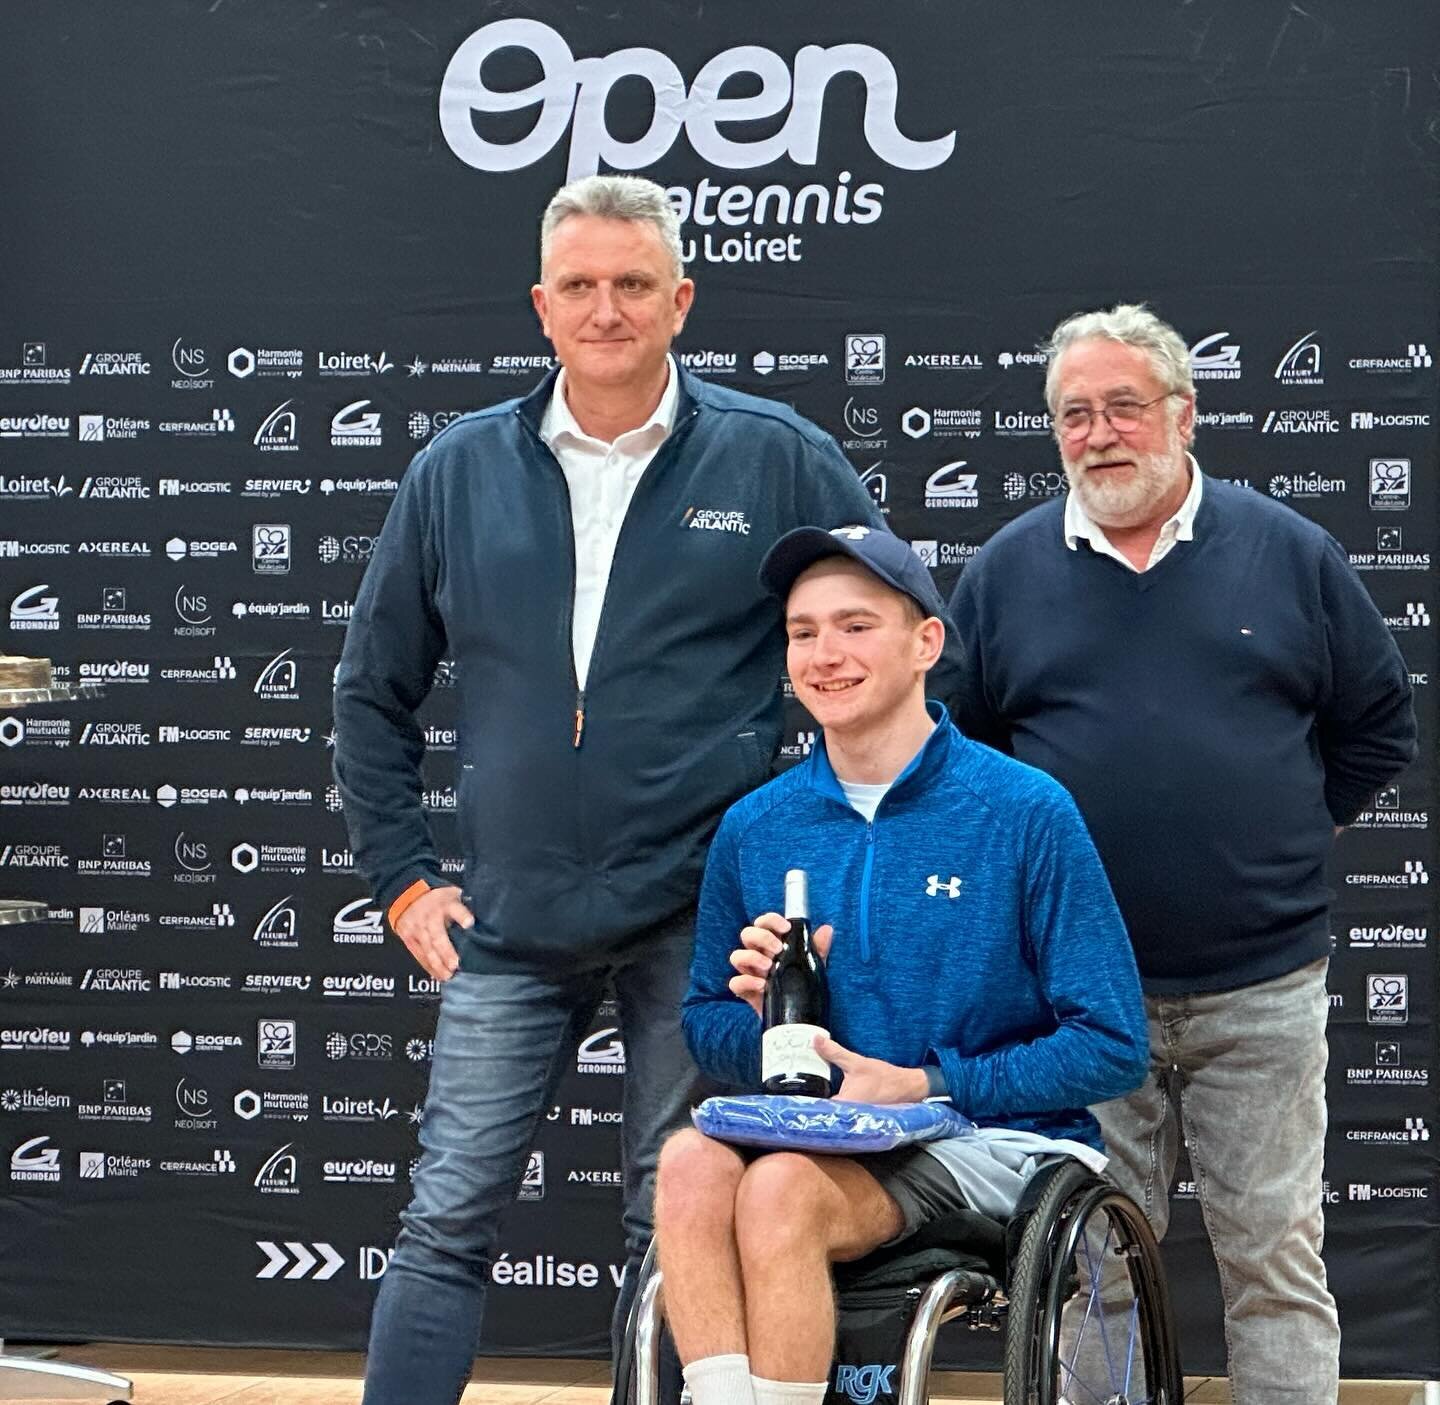 🎾♿️After not the greatest start to the week in 🇫🇷, I&rsquo;ve ended it in the best way possible 💪

🏆 Consolation Singles Winner
✅ Career Best Win - #41 

@davidlloydsouthampton @VarietyGB @ToyotaUK @toyota_europe #rgk #babolat #crps @HantsIOWTen